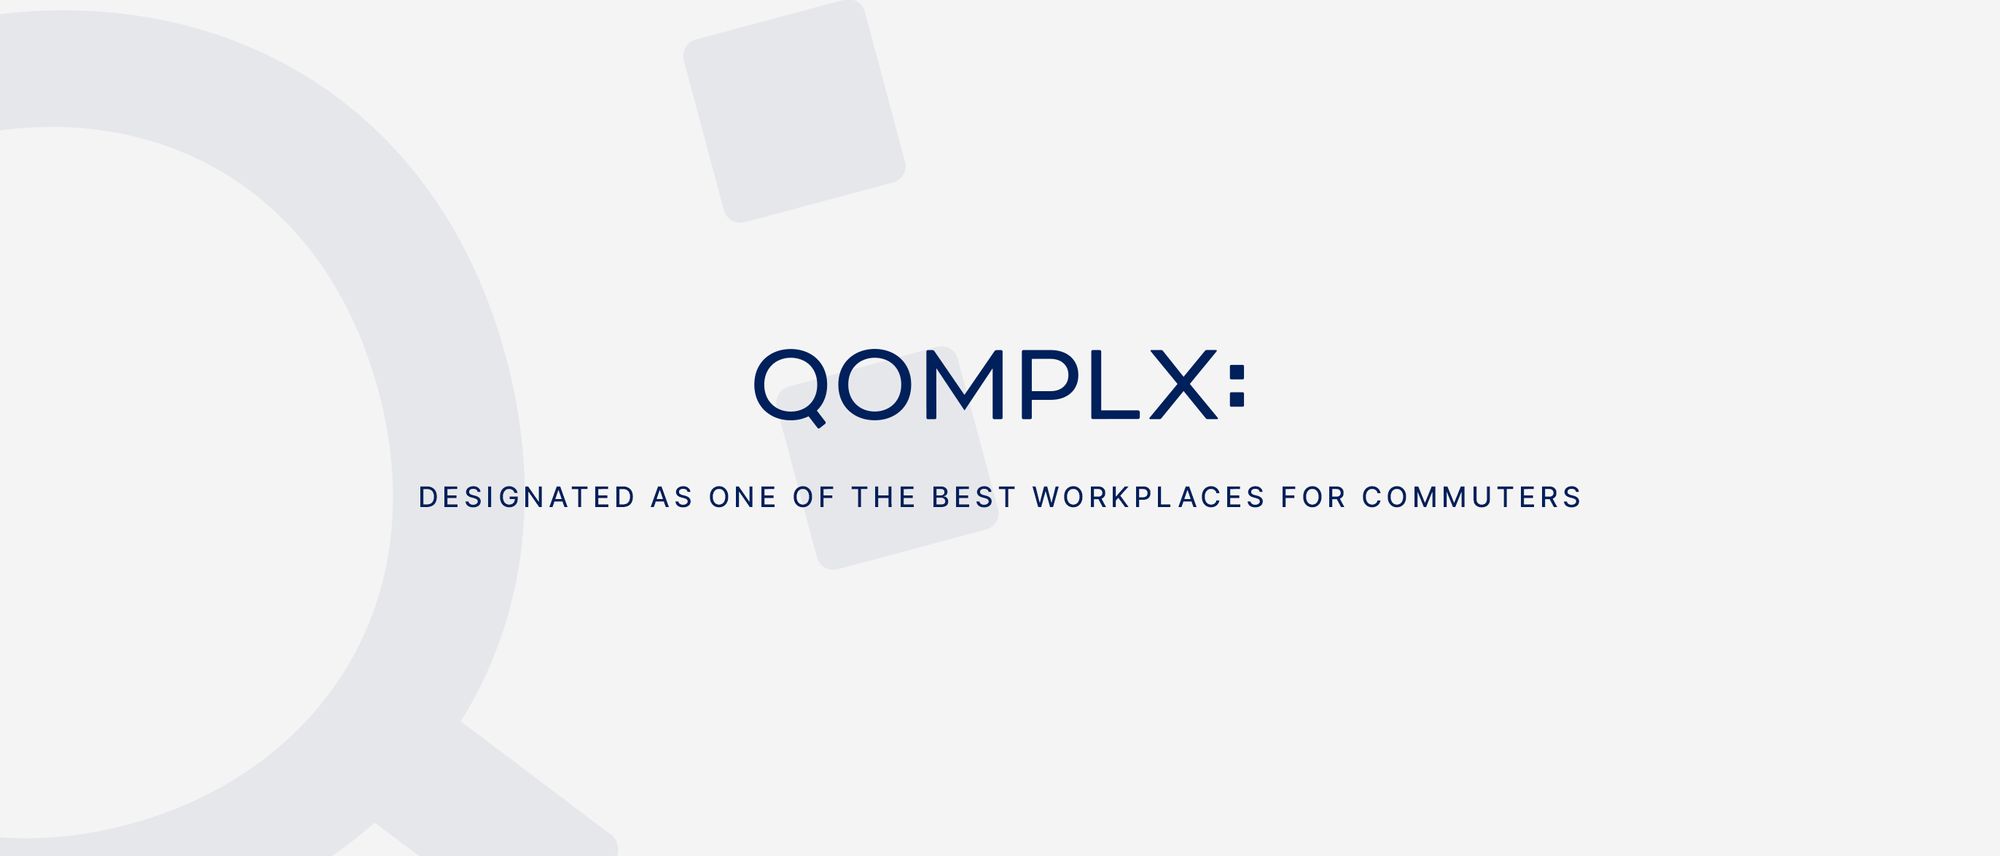 QOMPLX Named One of the 2021 Best Workplaces for Commuters